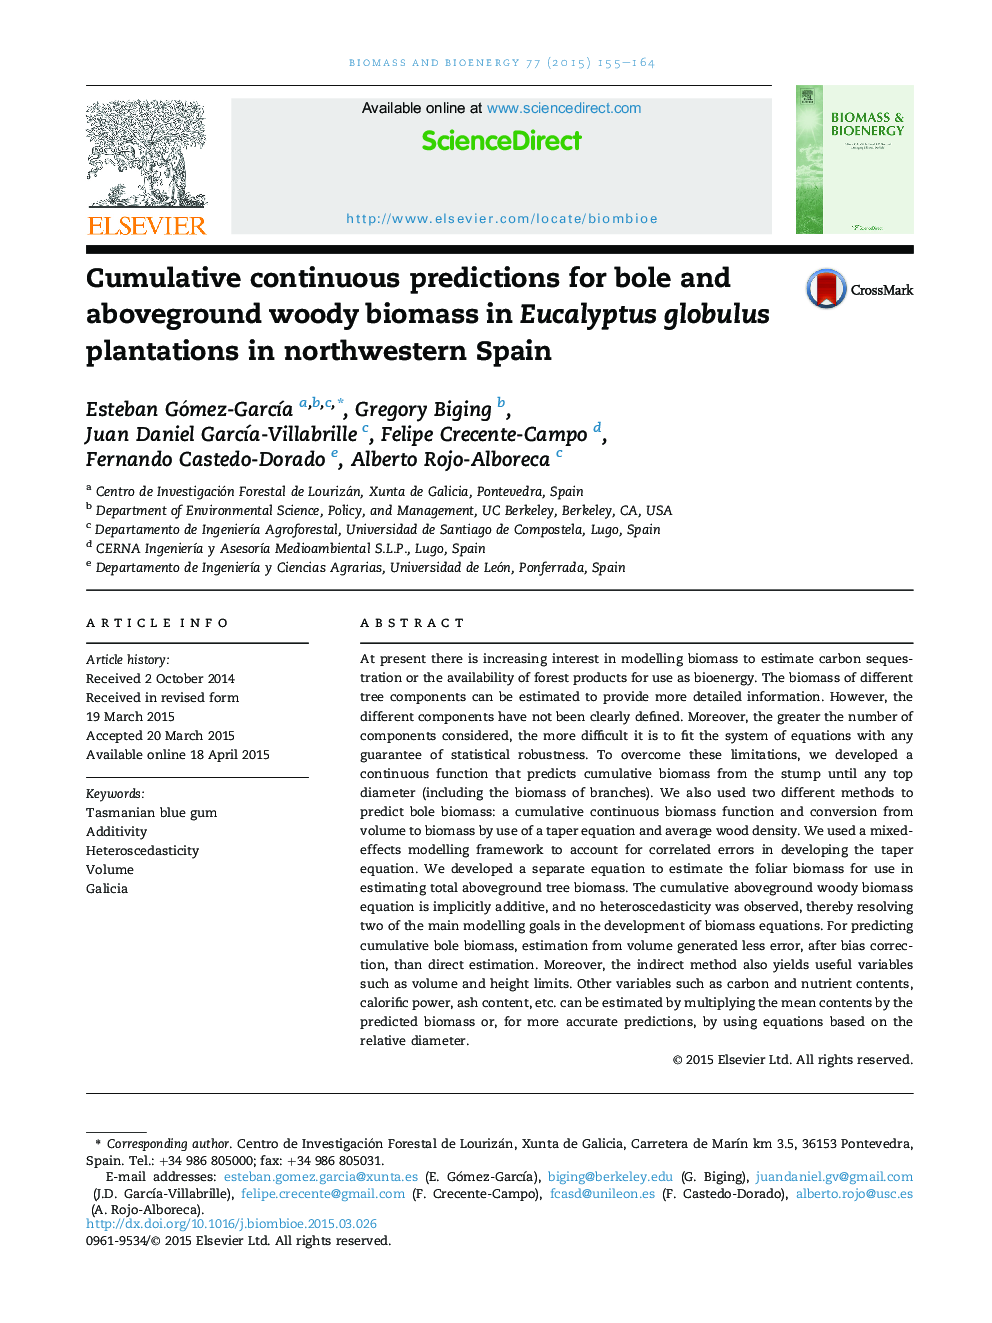 Cumulative continuous predictions for bole and aboveground woody biomass in Eucalyptus globulus plantations in northwestern Spain